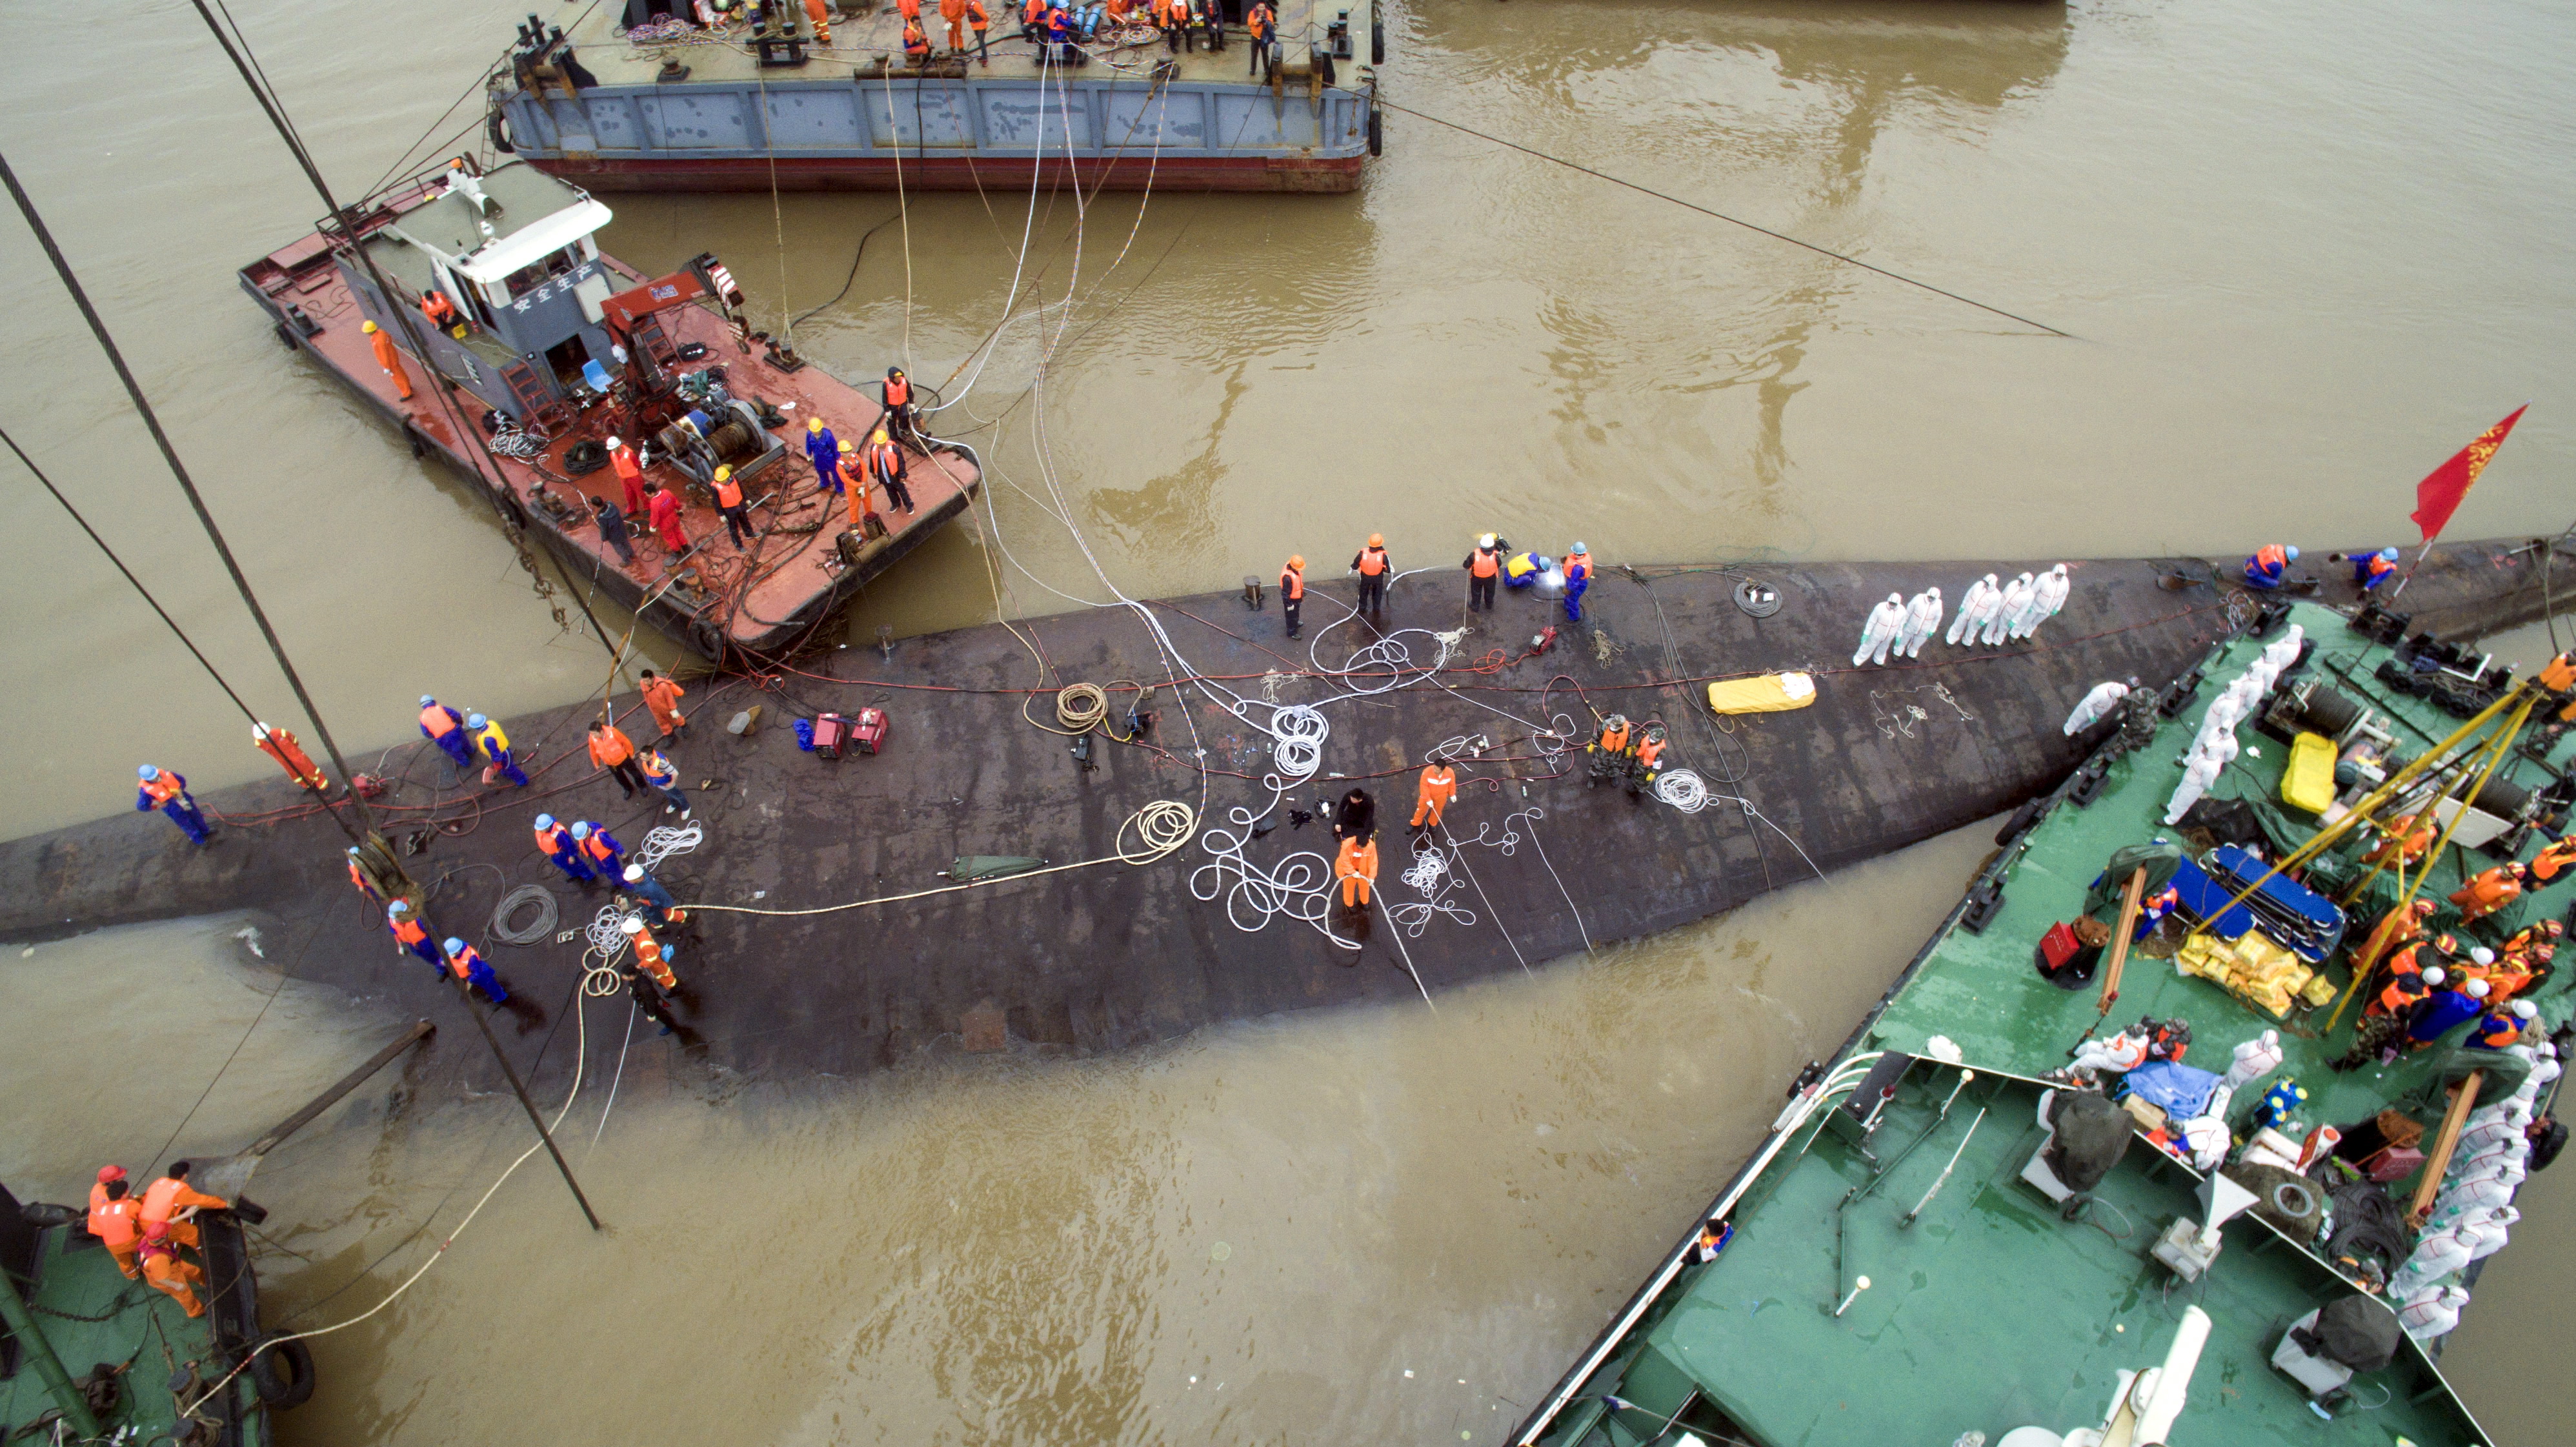 An aerial view shows rescue workers standing on the sunken cruise ship Eastern Star in Jianli, Hubei province, China, June 4, 2015 (Reuters)